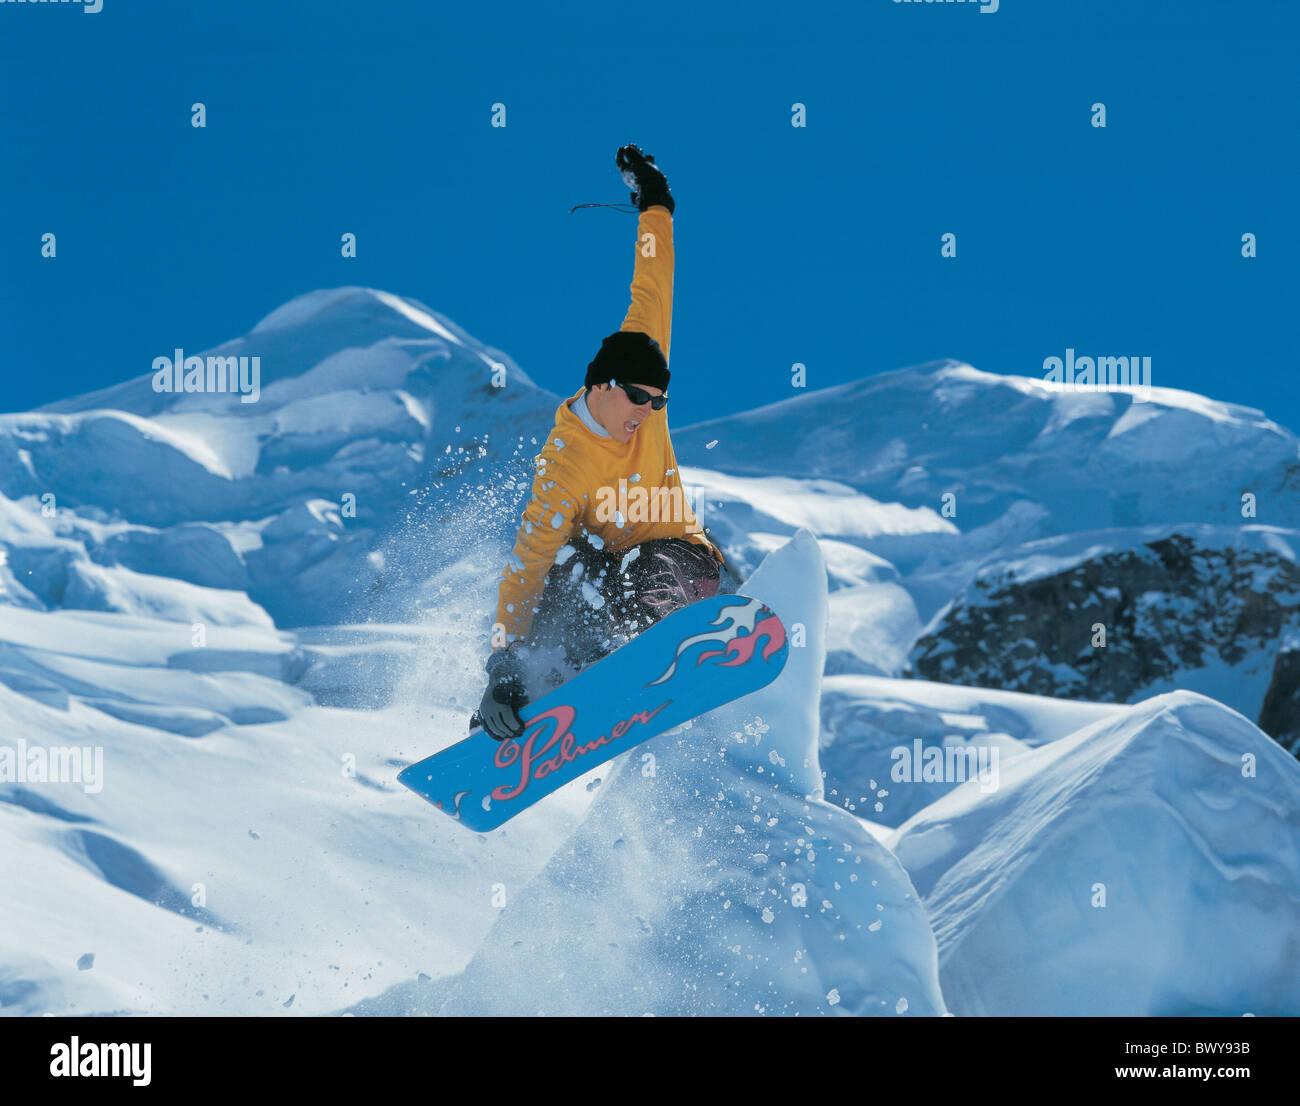 action jump man mountains snow snowboard Snowboarder spare time sports Alps winter sports winter Switzer Stock Photo